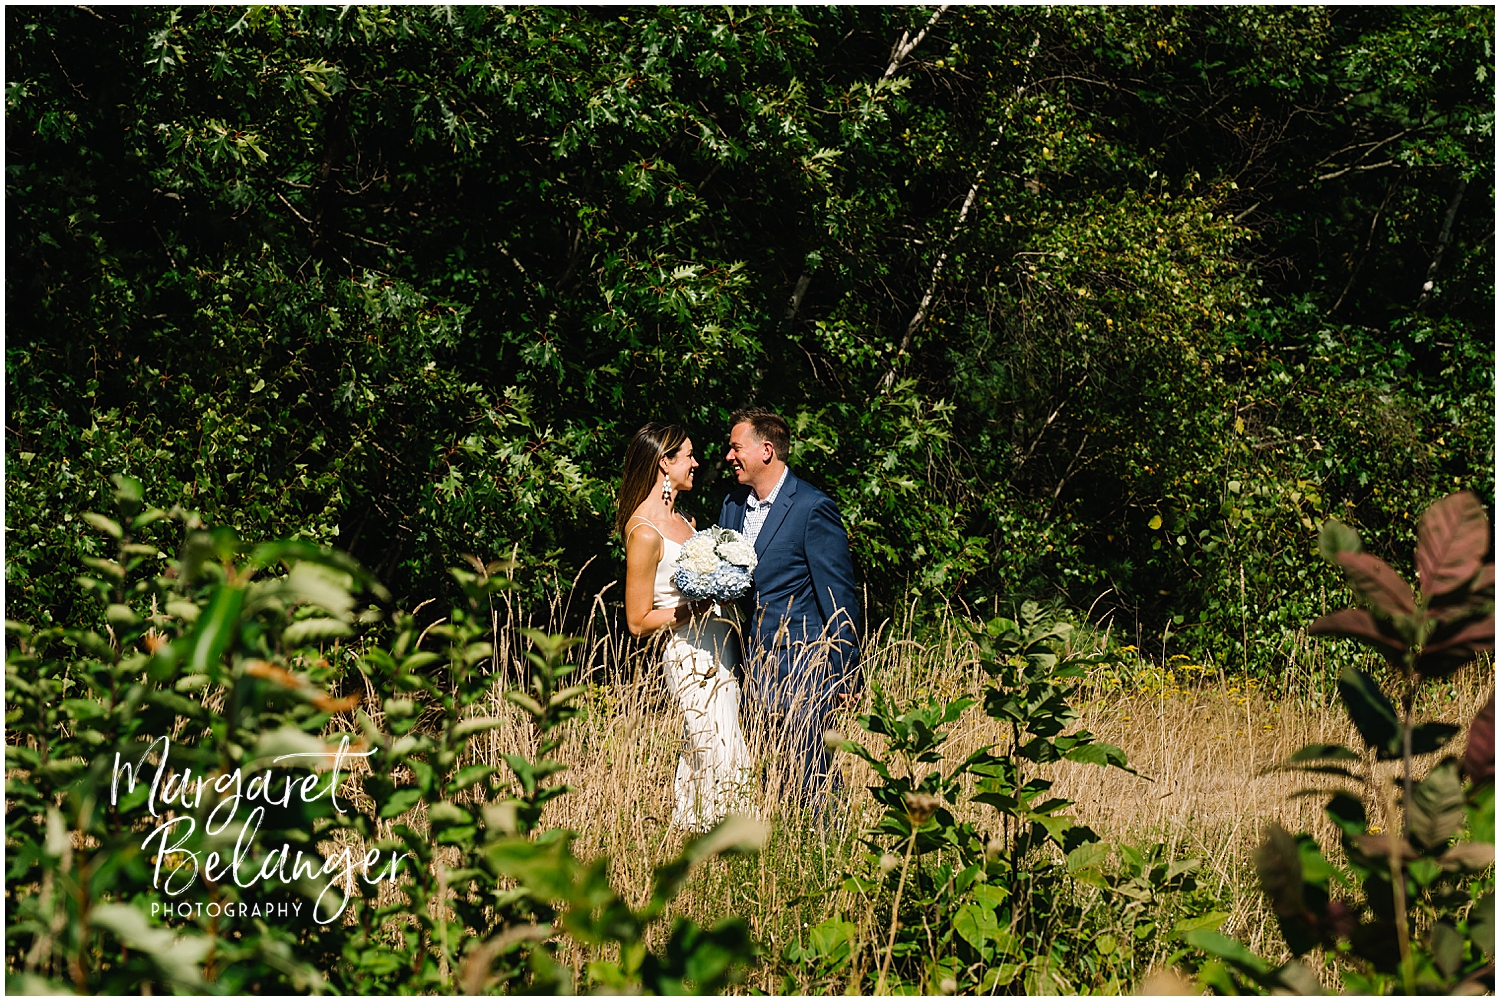 Bride and groom sharing a moment in a sunny meadow with greenery in the background.